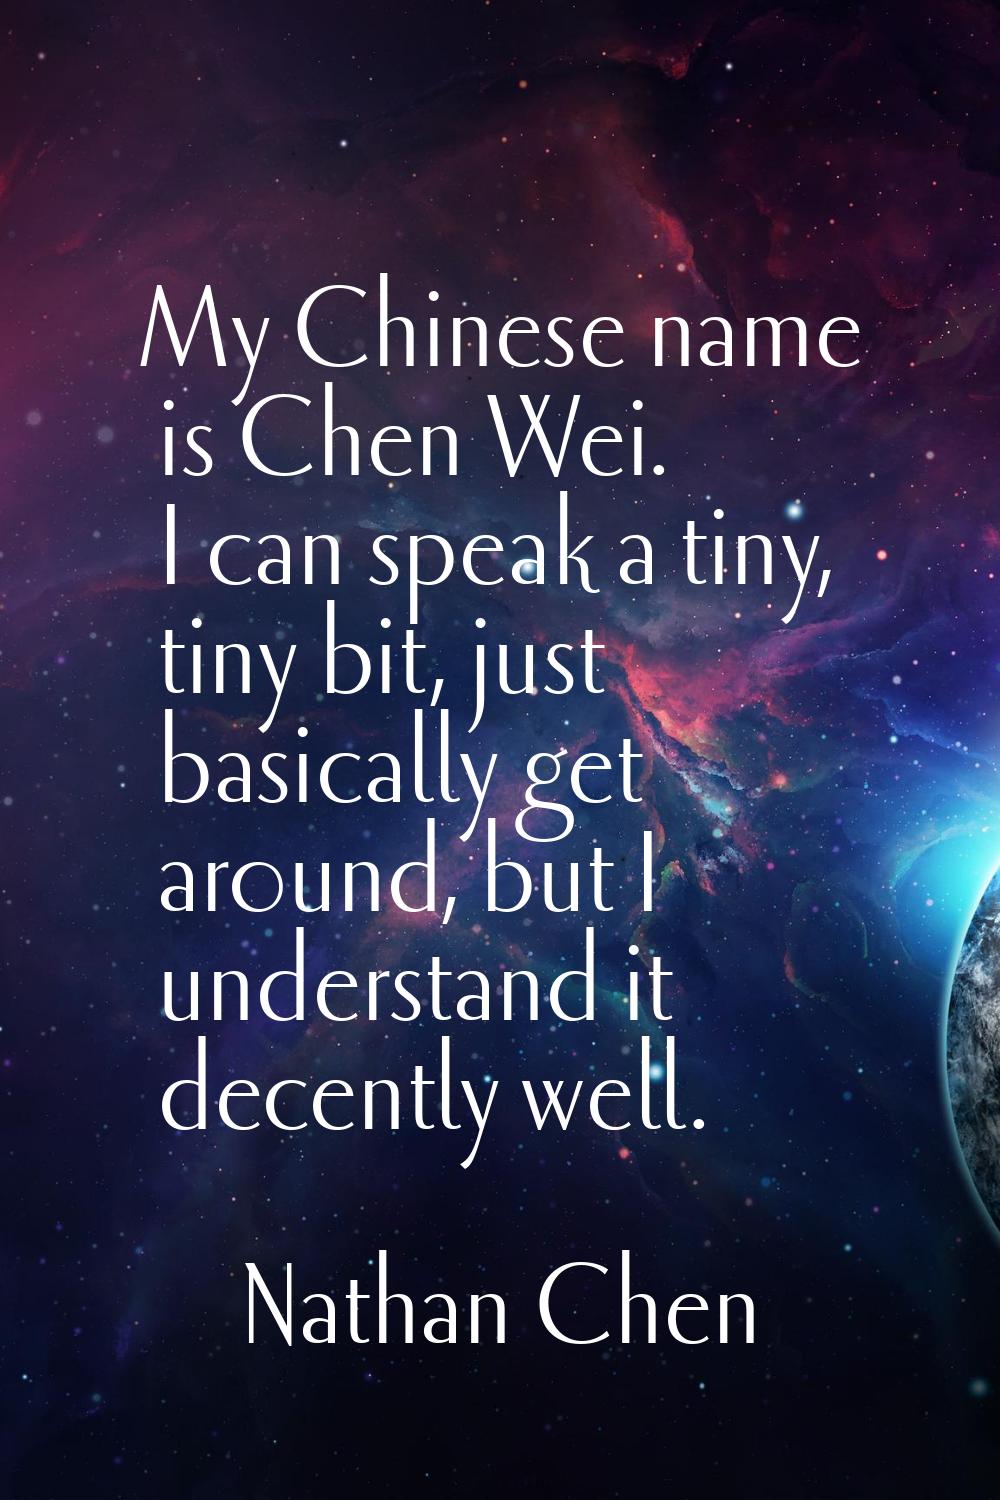 My Chinese name is Chen Wei. I can speak a tiny, tiny bit, just basically get around, but I underst